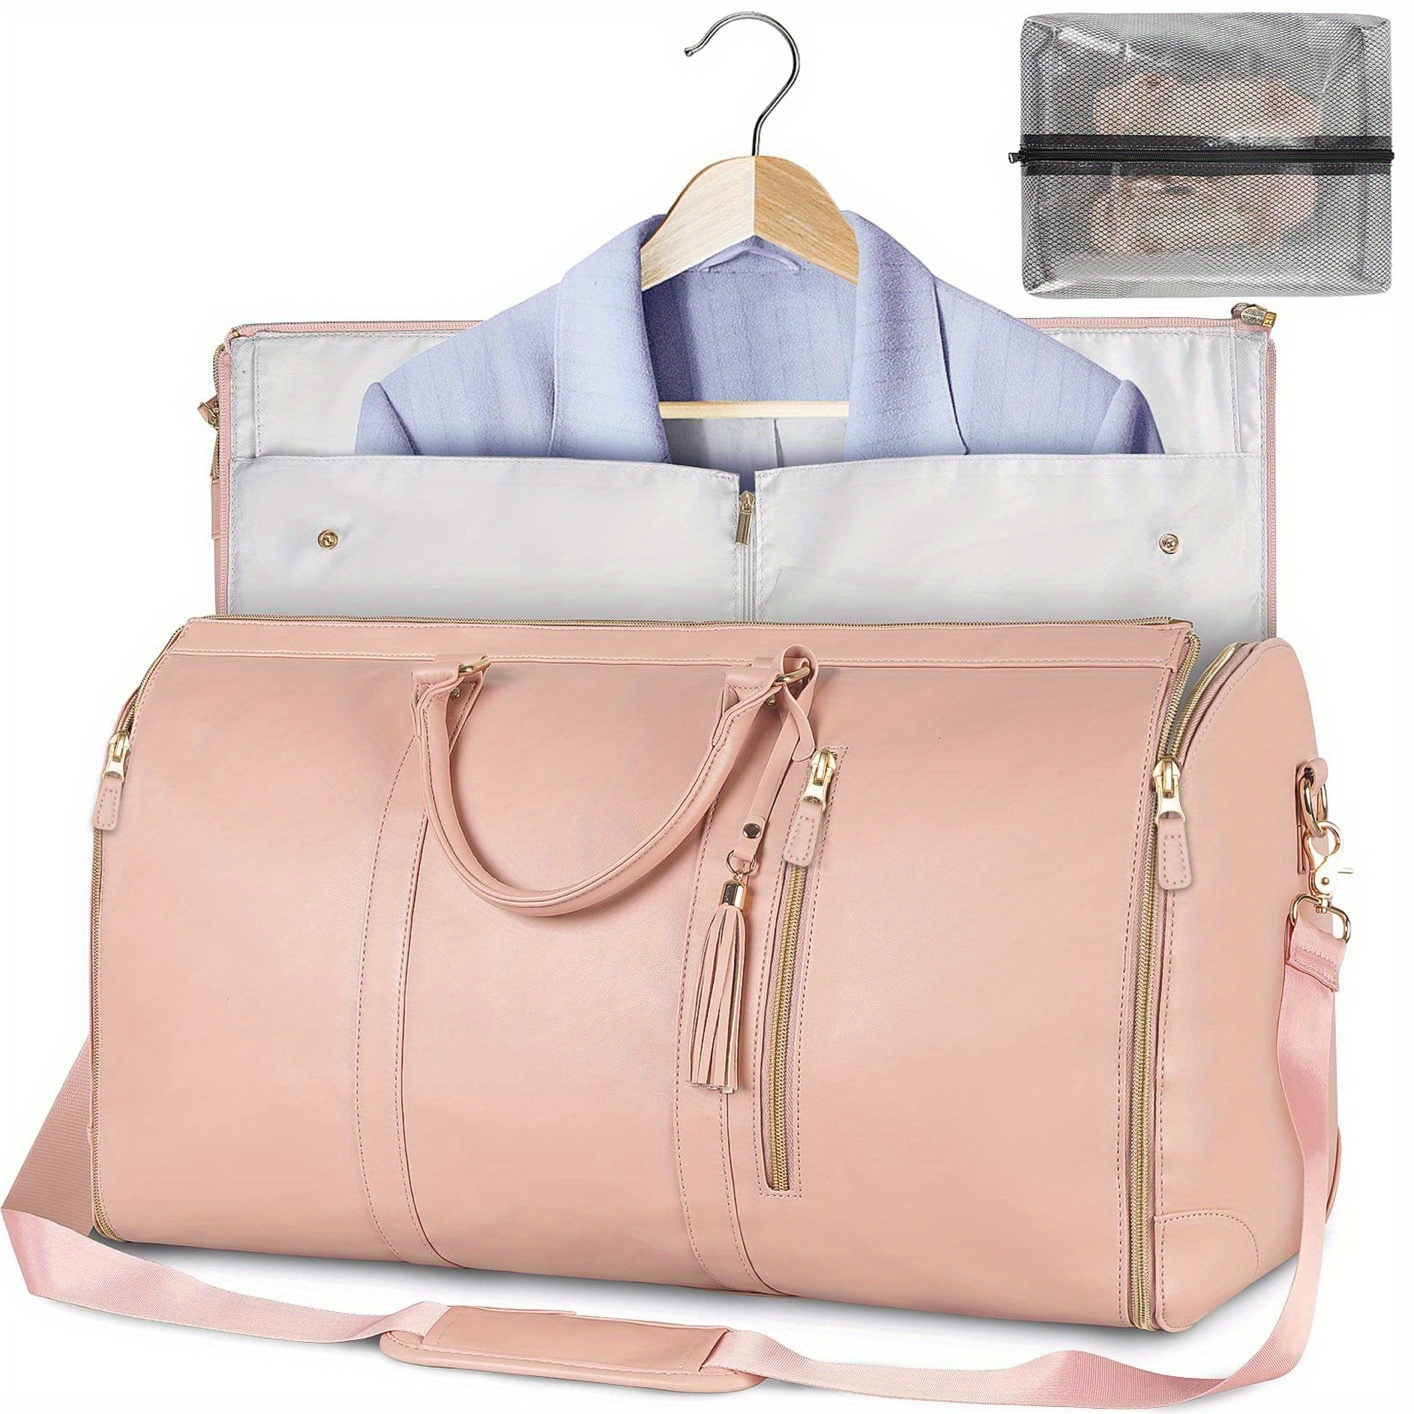 

Large Pu Leather Duffle Bag For Women, Waterproof Garment Bags For Travel With Shoe Pouch, 2 In 1 Hanging Suitcase Suit Travel Bags, Gifts For Women, Pink